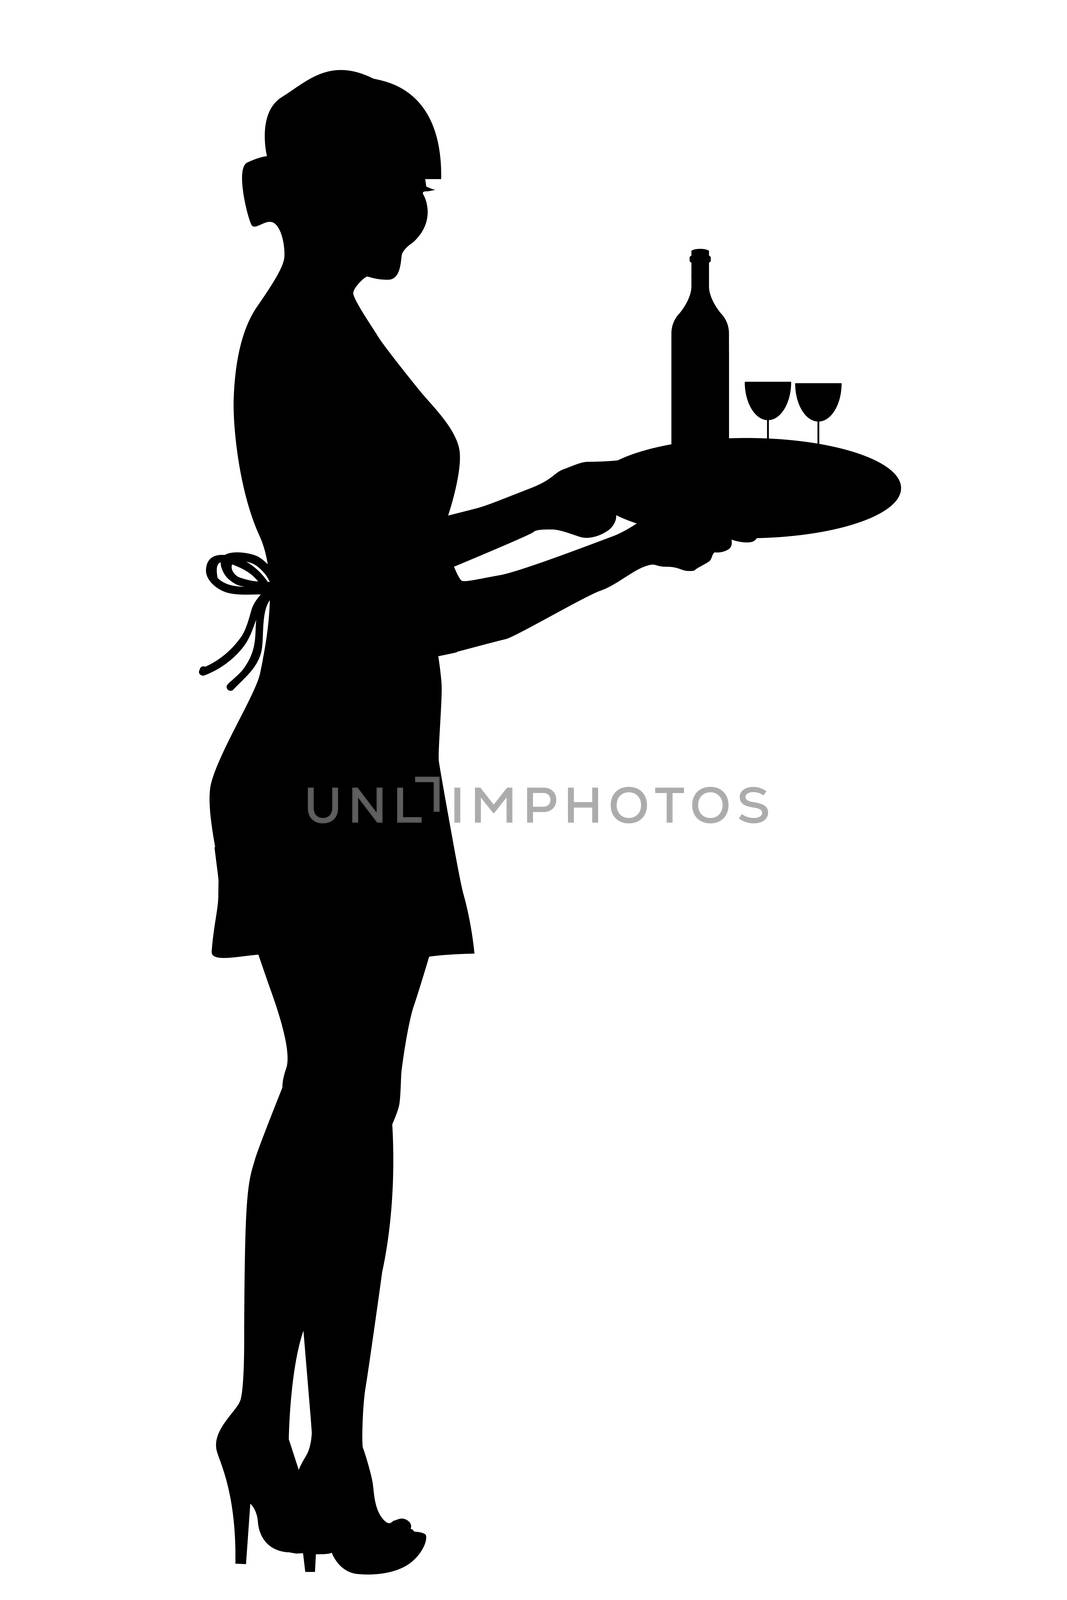 Waitress silhouette holding a tray with wine glasses and a bottl by hibrida13